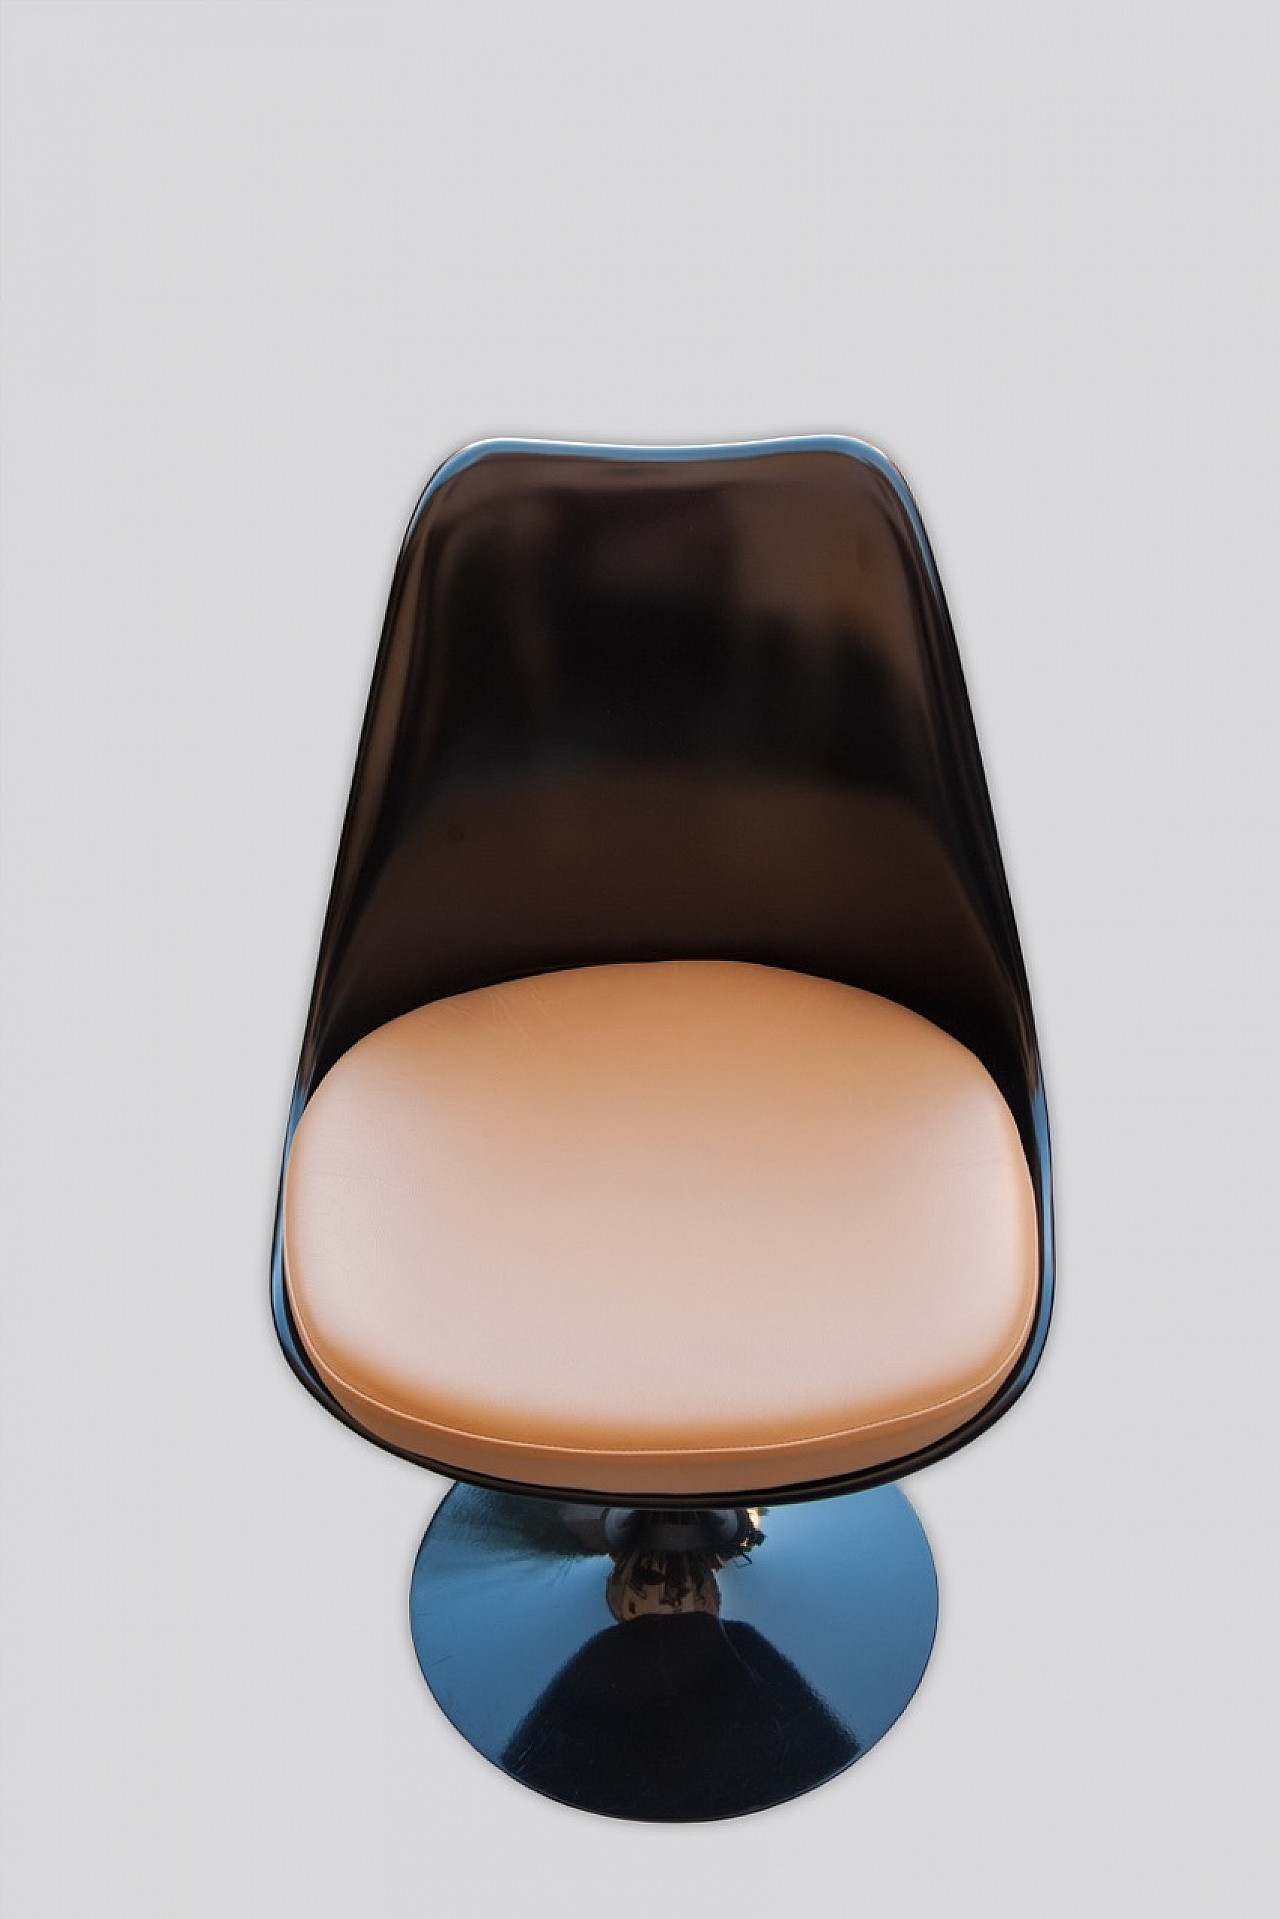 6 "Tulip" black swivel chairs by Eero Sarinen for Knoll 2